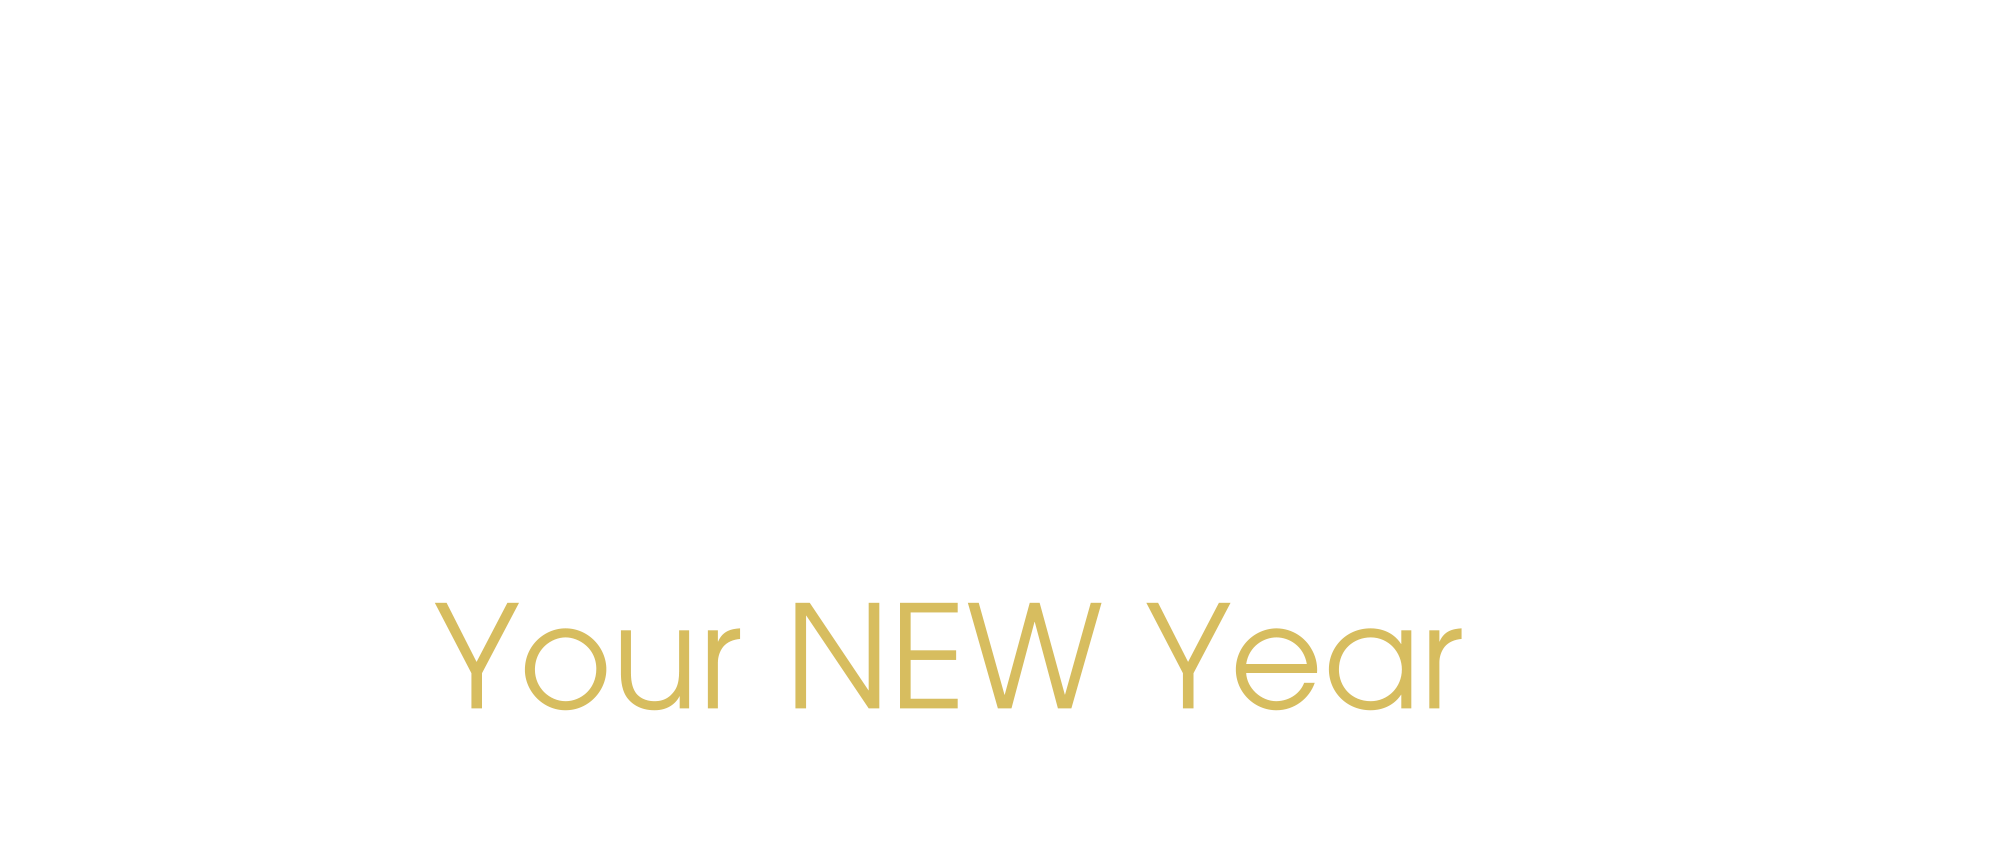 Planning Your New Year title